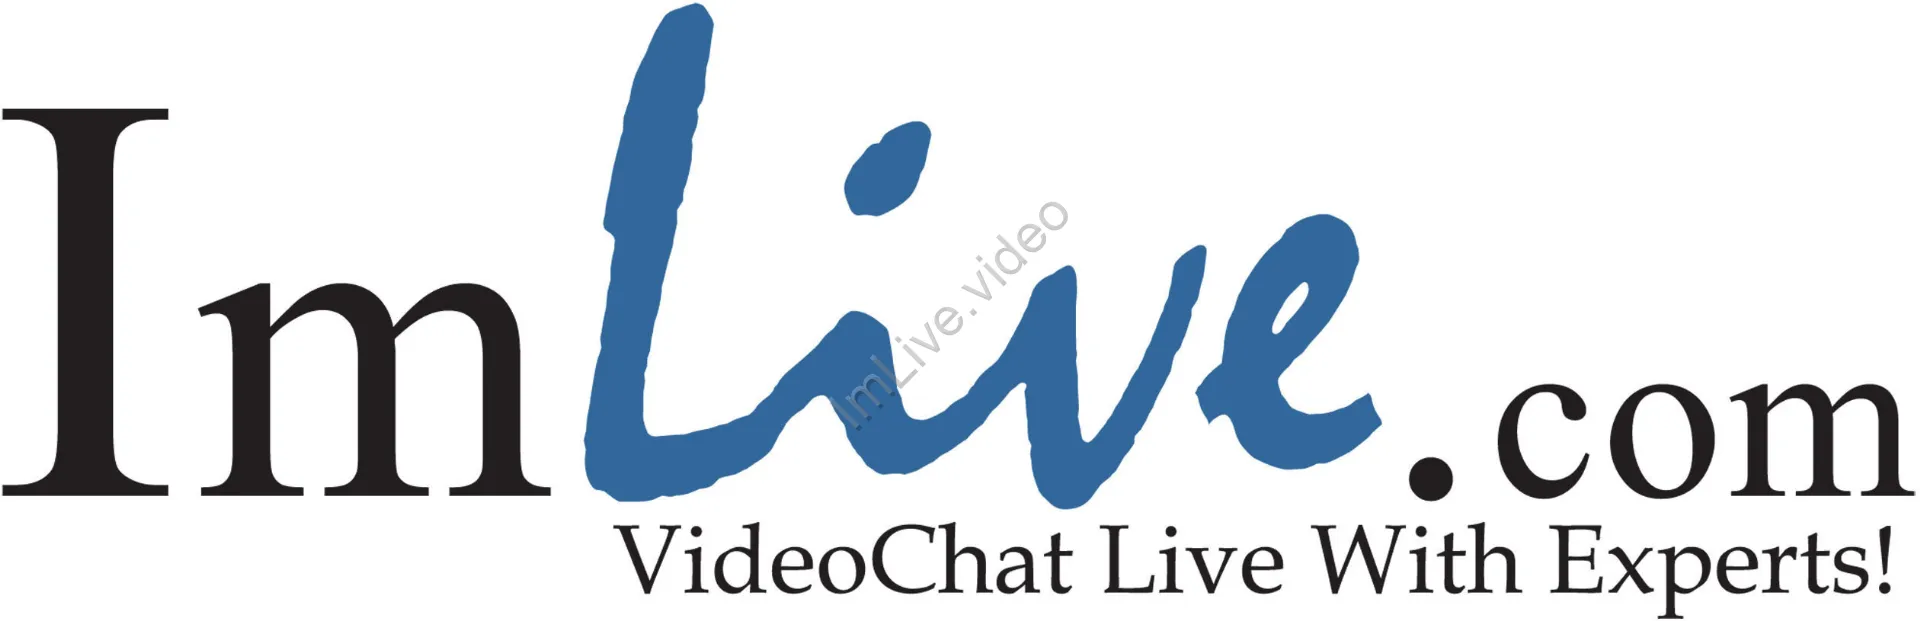 Using Imlive Video for Business and Networking